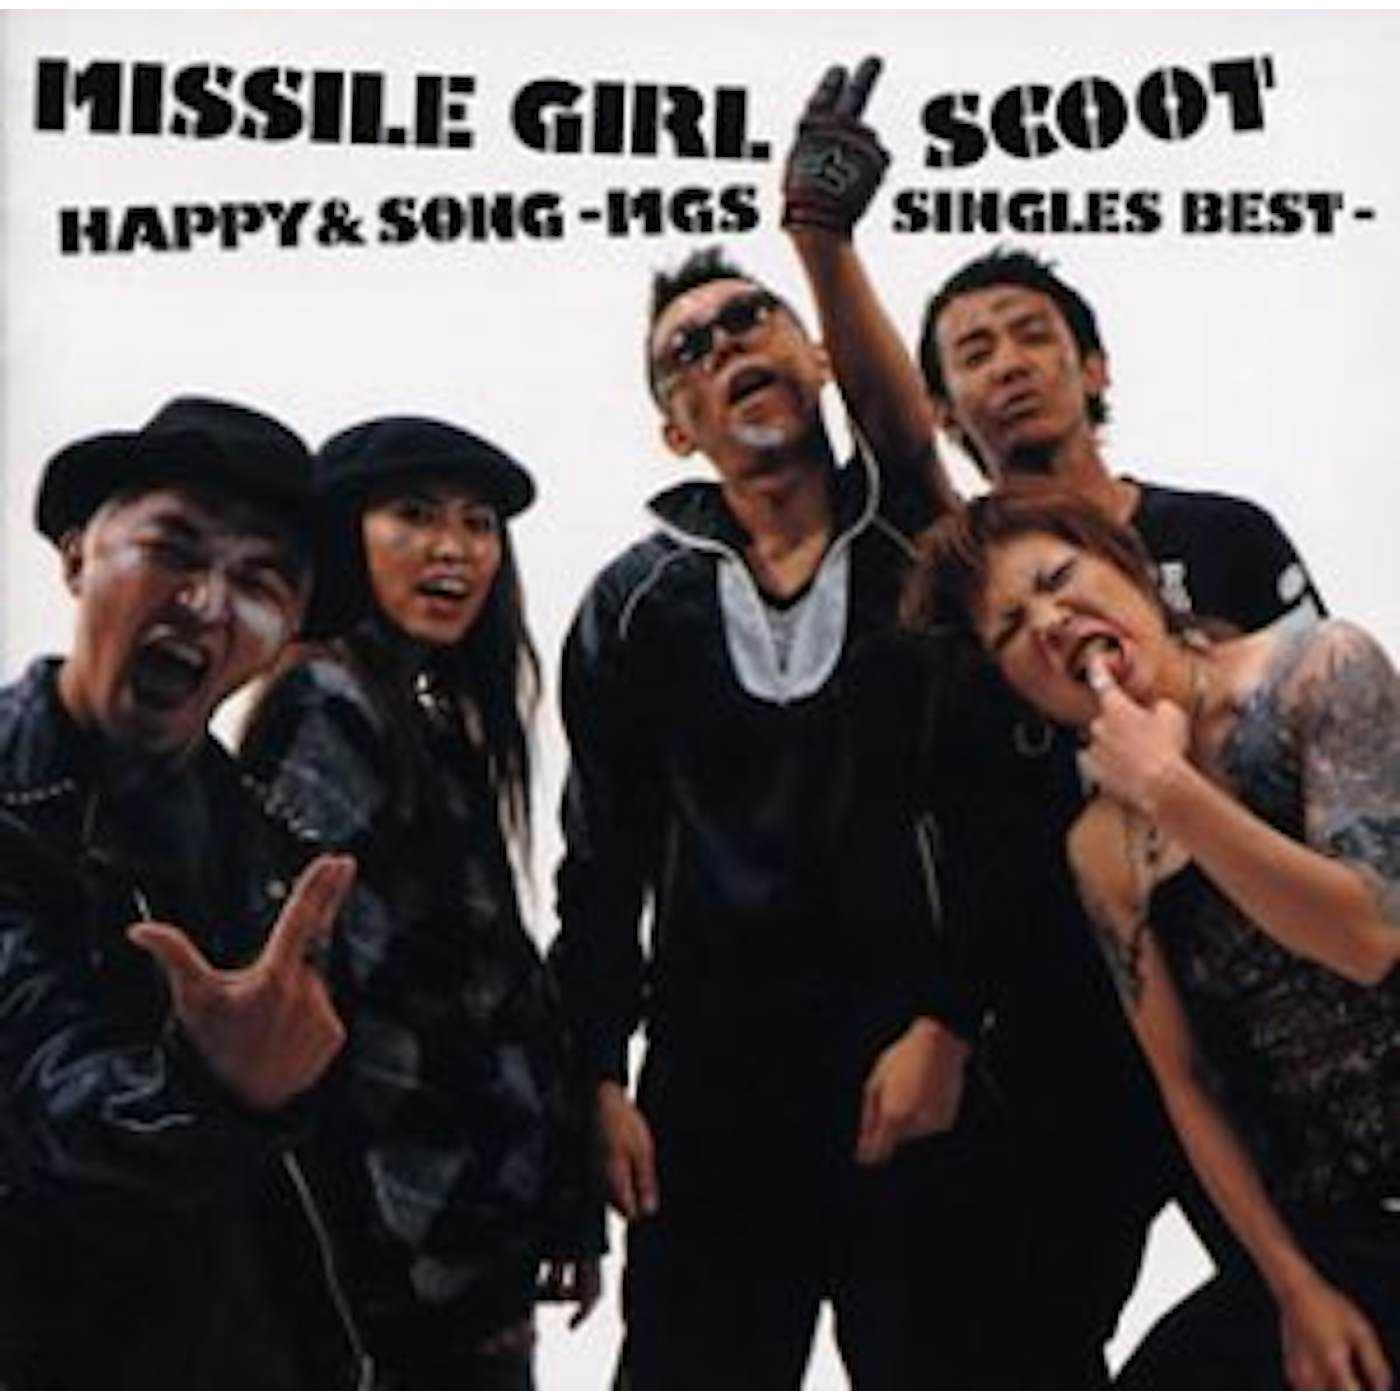 Missile Girl Scoot HAPPY&SONG / MGS SINGLES BEST CD